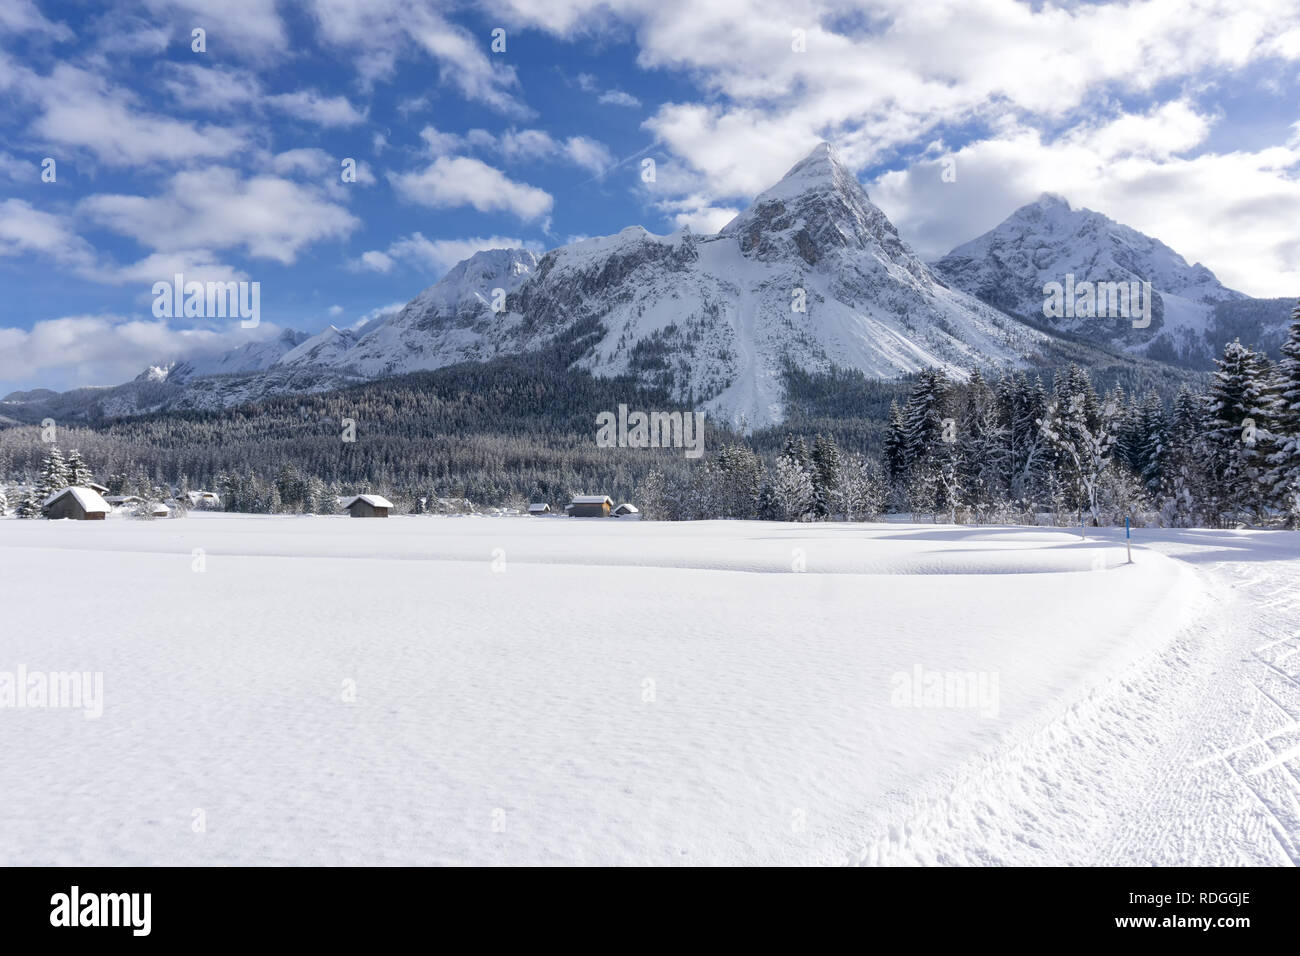 Winter mountain landscape with groomed ski trails and blue sky with white clouds in sunny day. Ehrwald valley, Tirol, Alps, Austria. Stock Photo